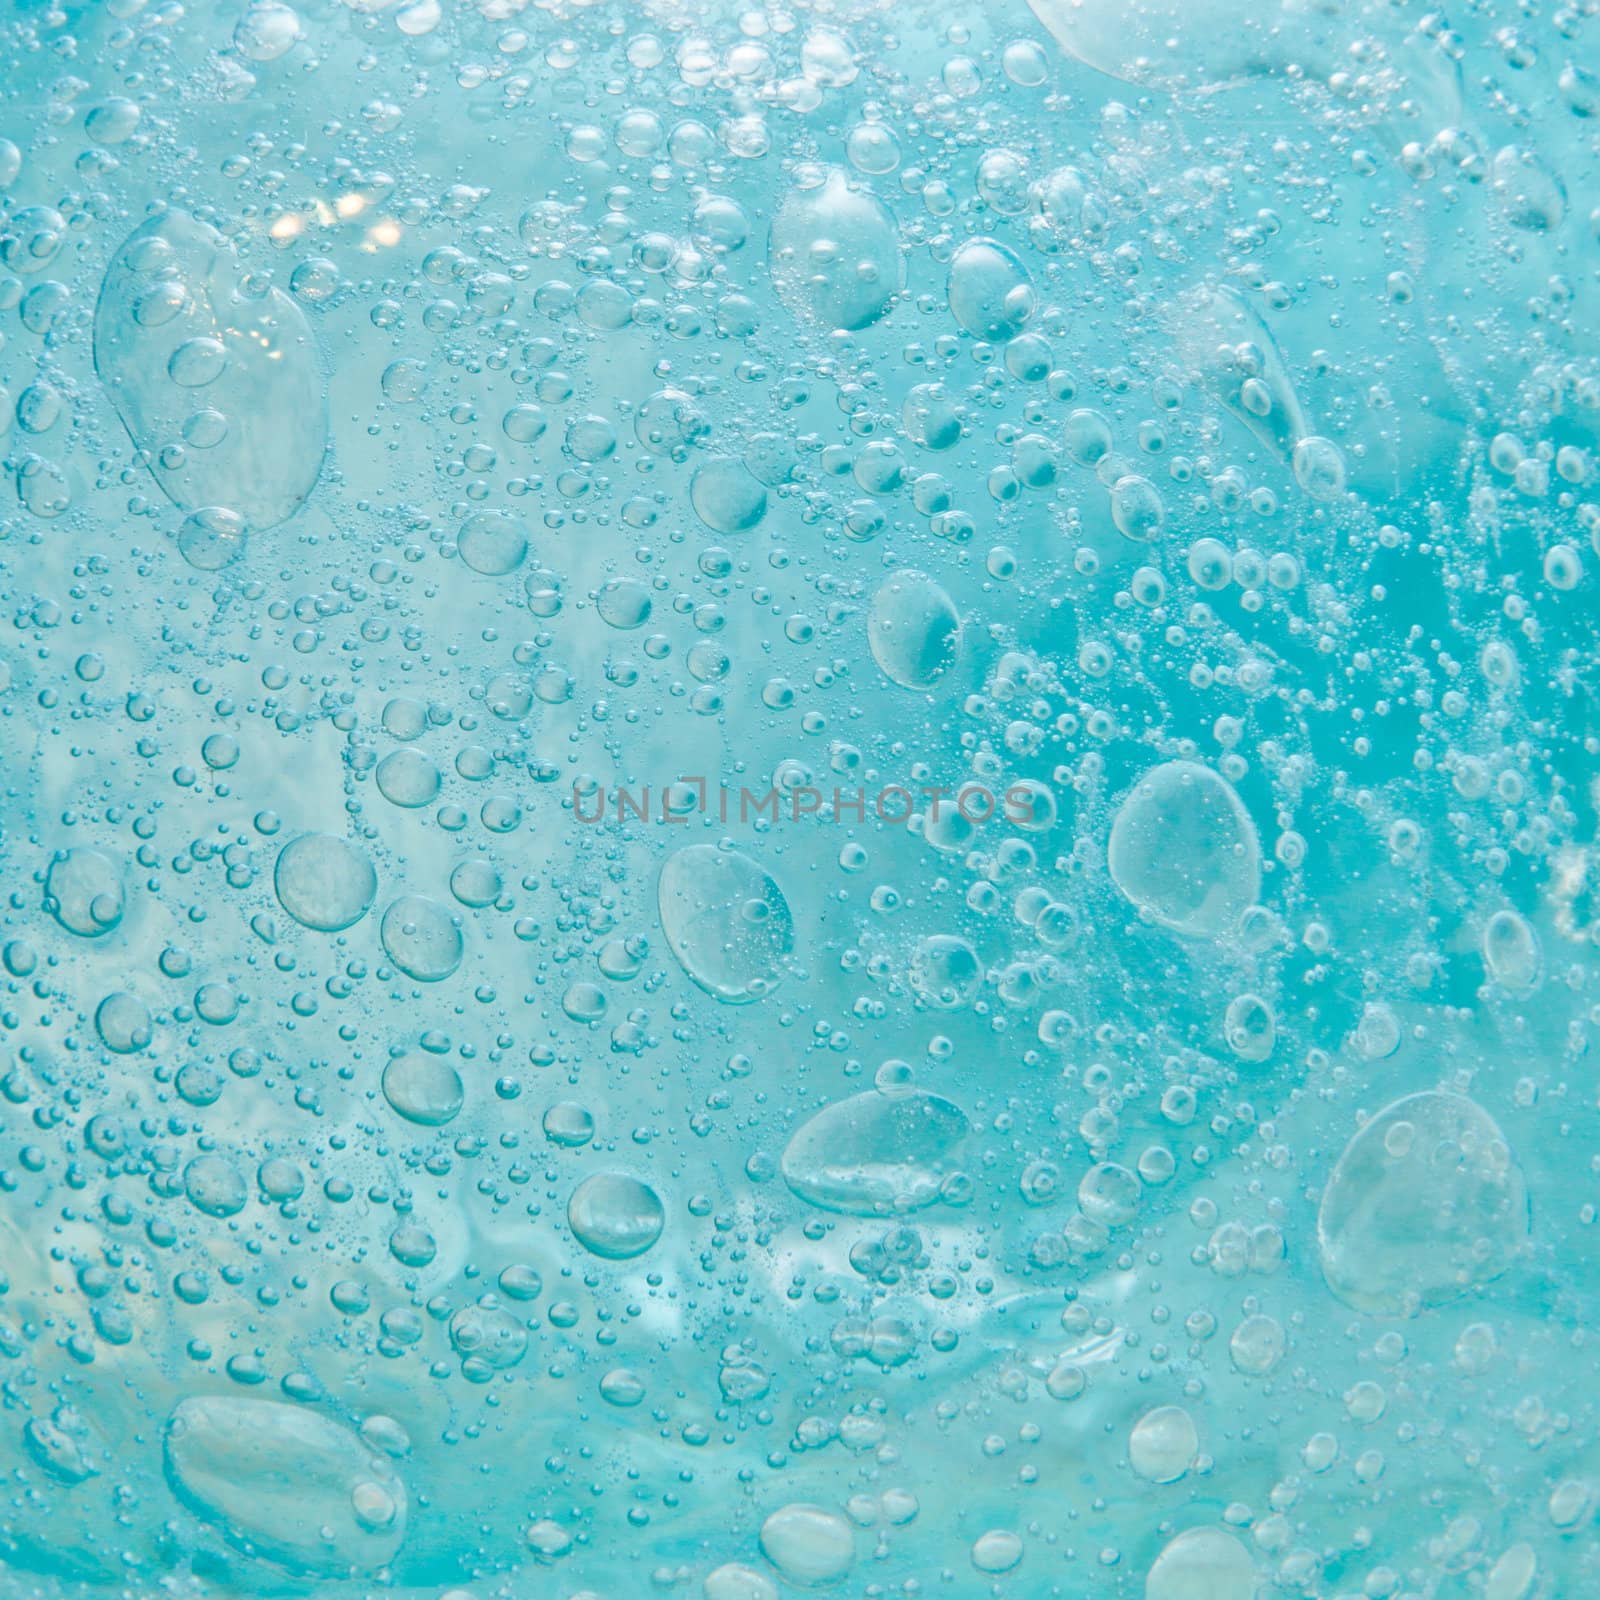 Blue bubbles in glass as a fresh background image